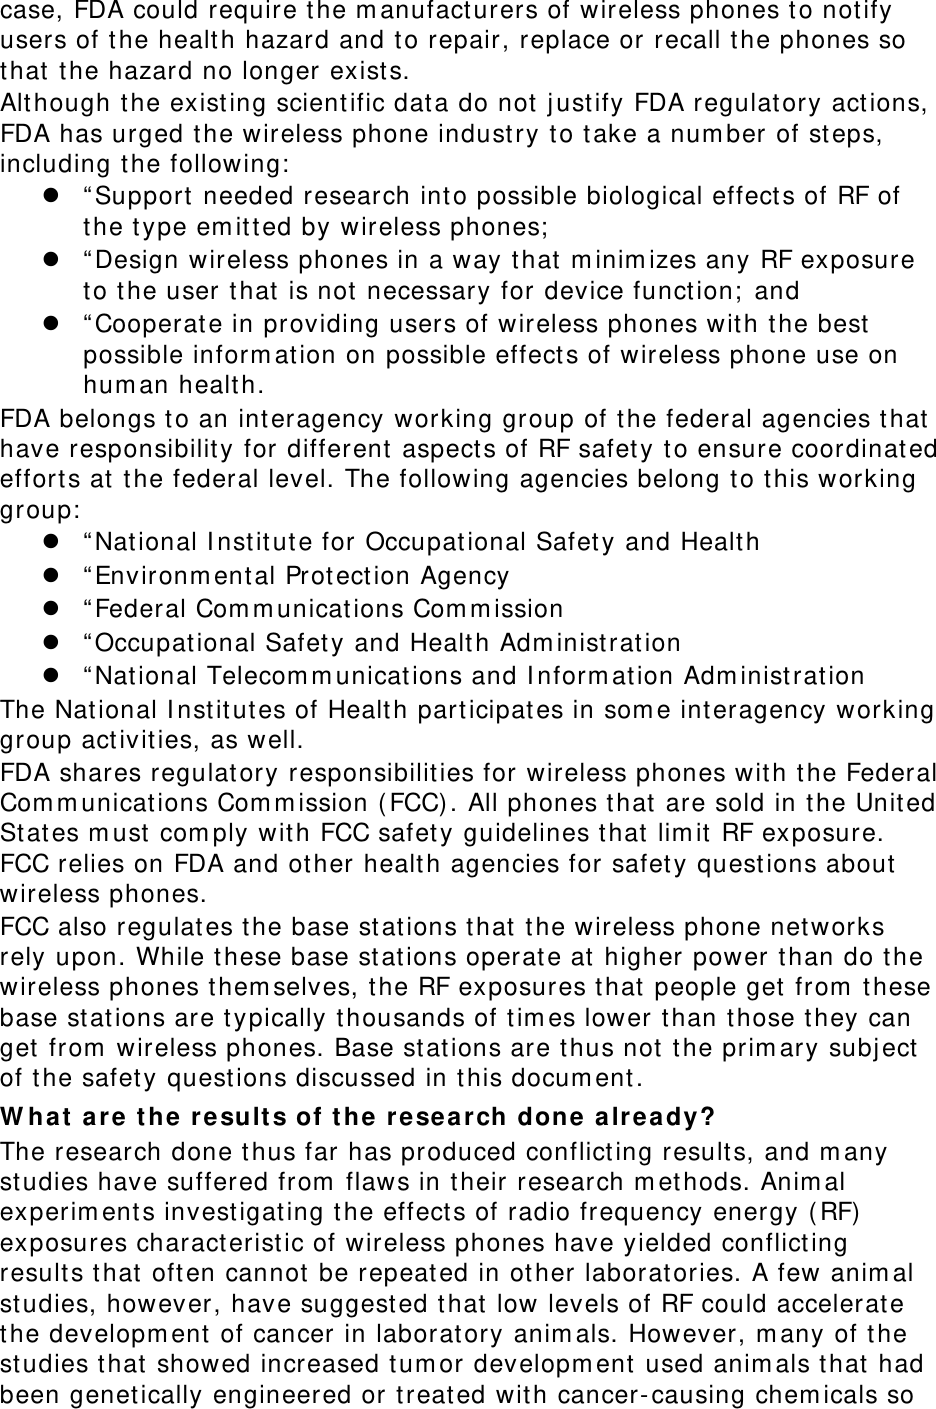 case, FDA could require t he m anufact urers of wireless phones t o not ify users of the healt h hazard and t o repair, replace or recall t he phones so that  t he hazard no longer exist s. Although t he exist ing scientific dat a do not  j ust ify FDA regulatory act ions, FDA has urged t he wireless phone indust ry to t ake a num ber of st eps, including t he following:   “ Support  needed research int o possible biological effect s of RF of the t ype em it t ed by wireless phones;   “ Design wireless phones in a way t hat m inim izes any RF exposure to t he user that  is not  necessary for device funct ion;  and  “ Cooperat e in providing users of wireless phones with t he best  possible inform ation on possible effect s of wireless phone use on hum an healt h. FDA belongs to an int eragency working group of the federal agencies that  have responsibility for different  aspect s of RF safet y t o ensure coordinat ed effort s at  t he federal level. The following agencies belong to t his working group:   “ Nat ional I nst it ute for Occupational Safet y and Health  “ Environm ental Prot ect ion Agency  “ Federal Com m unicat ions Com m ission  “ Occupat ional Safet y and Healt h Adm inist rat ion  “ Nat ional Telecom m unicat ions and I nform ation Adm inistrat ion The Nat ional I nst itut es of Healt h part icipat es in som e int eragency working group act ivit ies, as well. FDA shares regulatory responsibilities for wireless phones with t he Federal Com m unicat ions Com m ission ( FCC) . All phones t hat  are sold in t he Unit ed St at es m ust  com ply wit h FCC safet y guidelines t hat  lim it  RF exposure. FCC relies on FDA and other healt h agencies for safet y quest ions about  wireless phones. FCC also regulates t he base st at ions that  the wireless phone net works rely upon. While t hese base st at ions operat e at  higher power t han do t he wireless phones t hem selves, the RF exposures that  people get  from  t hese base st at ions are t ypically thousands of t im es lower t han t hose they can get  from  wireless phones. Base st at ions are t hus not t he prim ary subj ect  of t he safet y quest ions discussed in t his docum ent. W ha t  a re  t he  result s of t he resea r ch done a lre a dy? The research done t hus far has produced conflicting results, and m any studies have suffered from  flaws in t heir research m et hods. Anim al experim ents invest igat ing t he effect s of radio frequency energy ( RF)  exposures charact erist ic of wireless phones have yielded conflict ing results t hat  oft en cannot  be repeat ed in ot her laborat ories. A few anim al studies, however, have suggest ed t hat  low levels of RF could accelerat e the developm ent  of cancer in laborat ory anim als. However, m any of t he studies t hat  showed increased t um or developm ent  used anim als t hat  had been genet ically engineered or t reated wit h cancer- causing chem icals so 